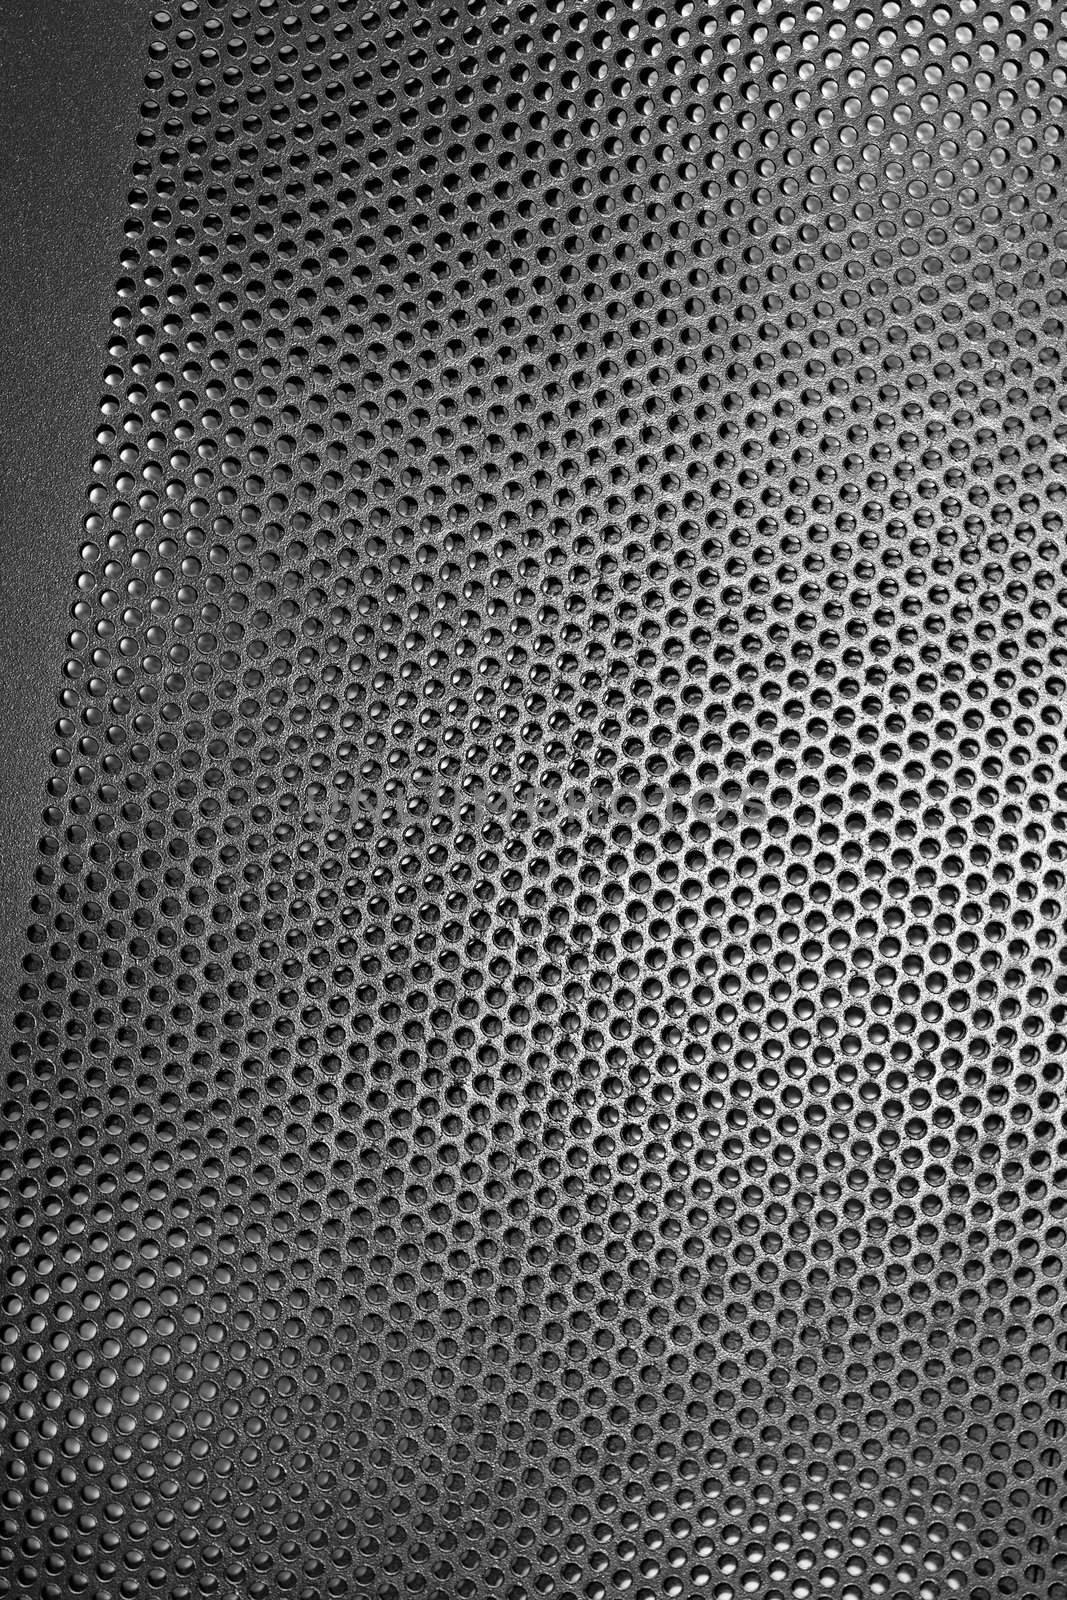 Black Iron Grill and the substrate from the grid as a background